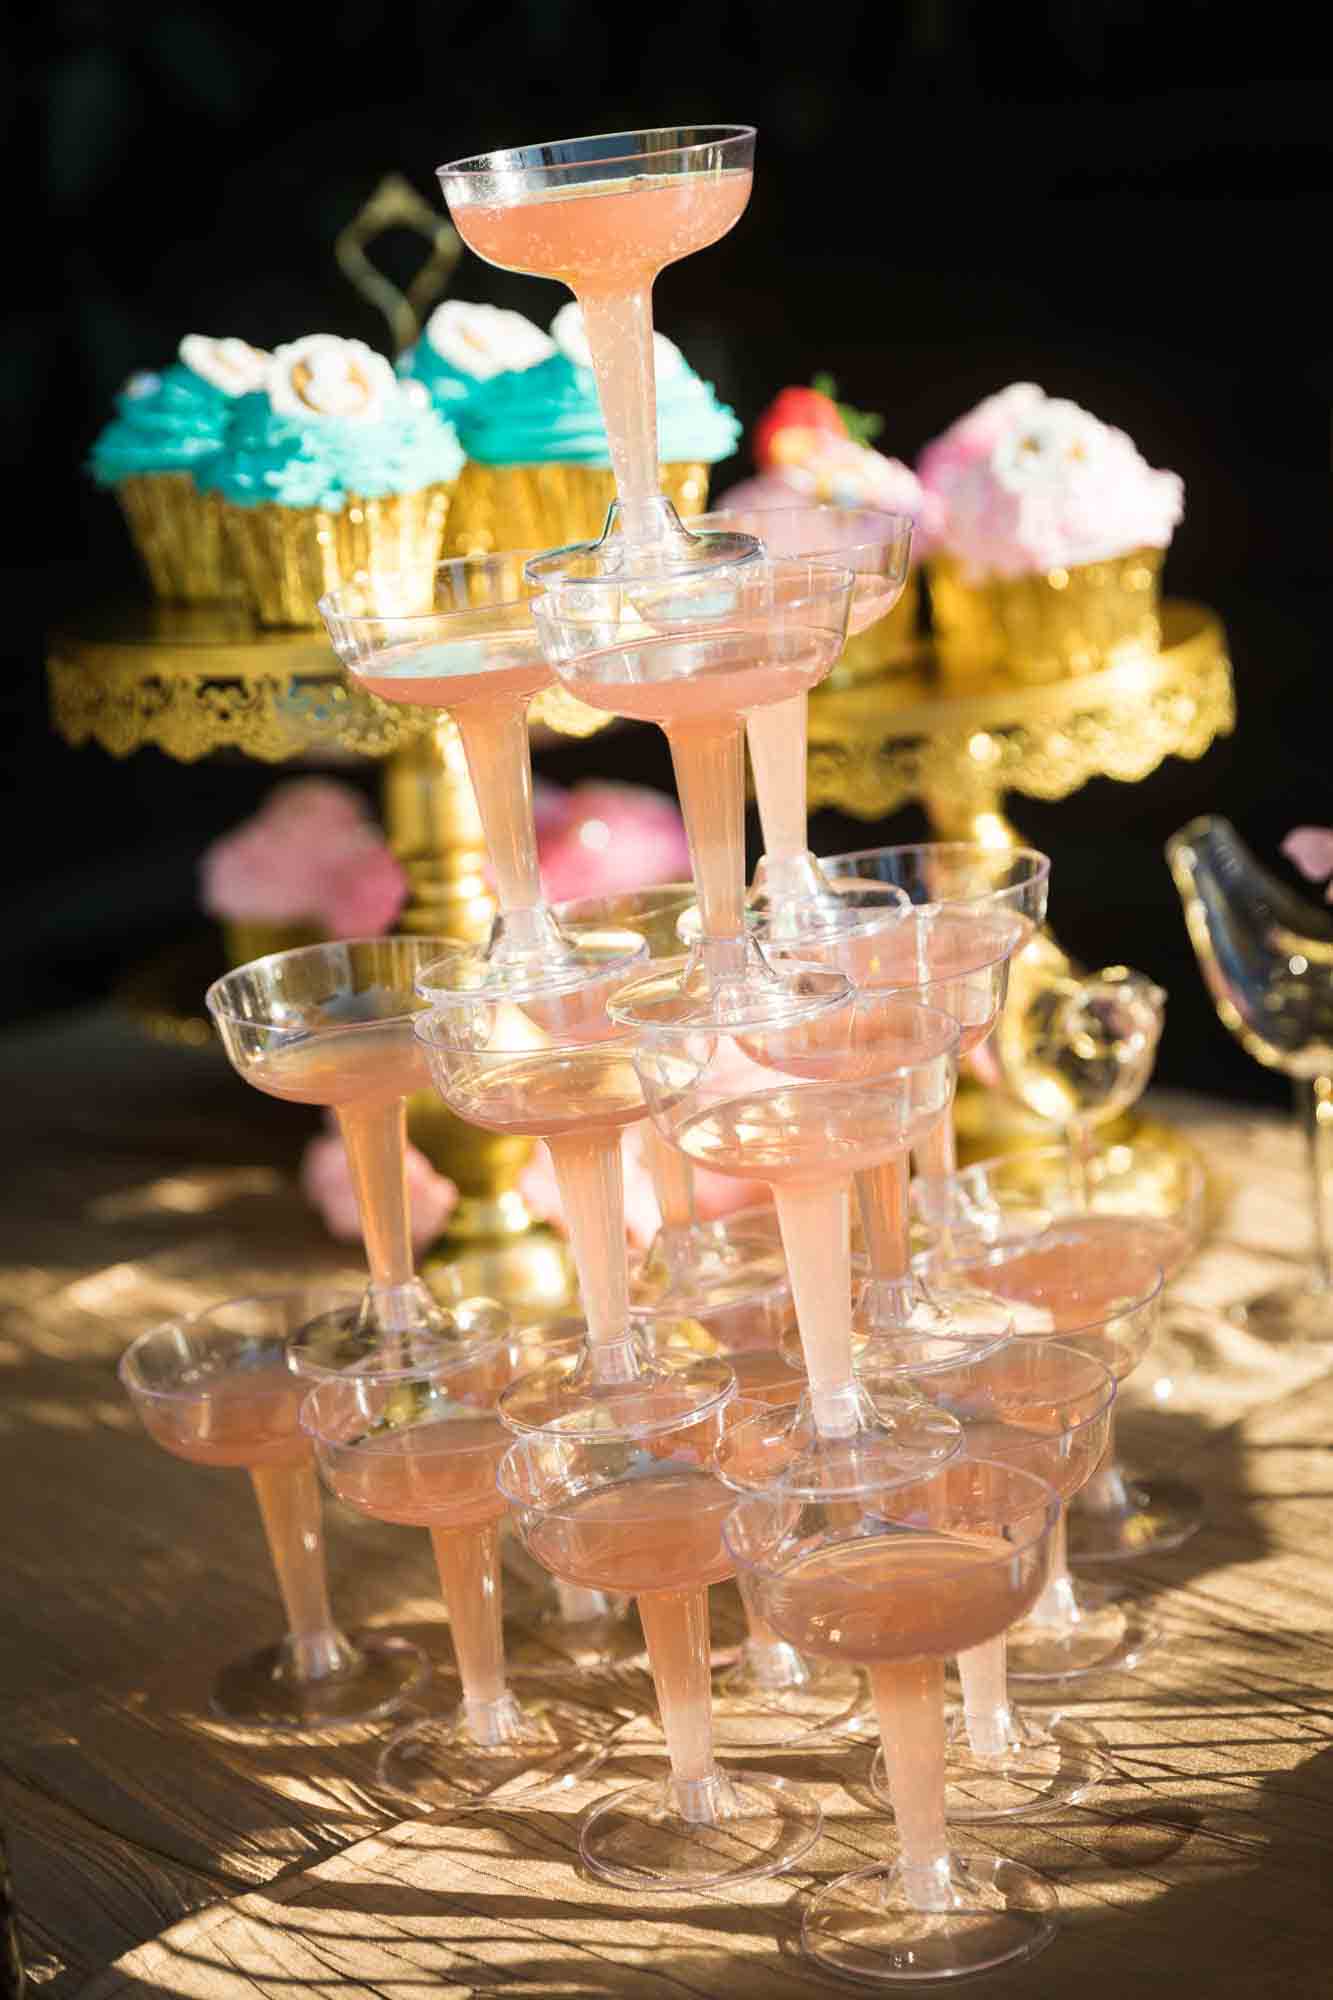 Tower of champagne glasses filled with pink champagne in front of elaborate desserts